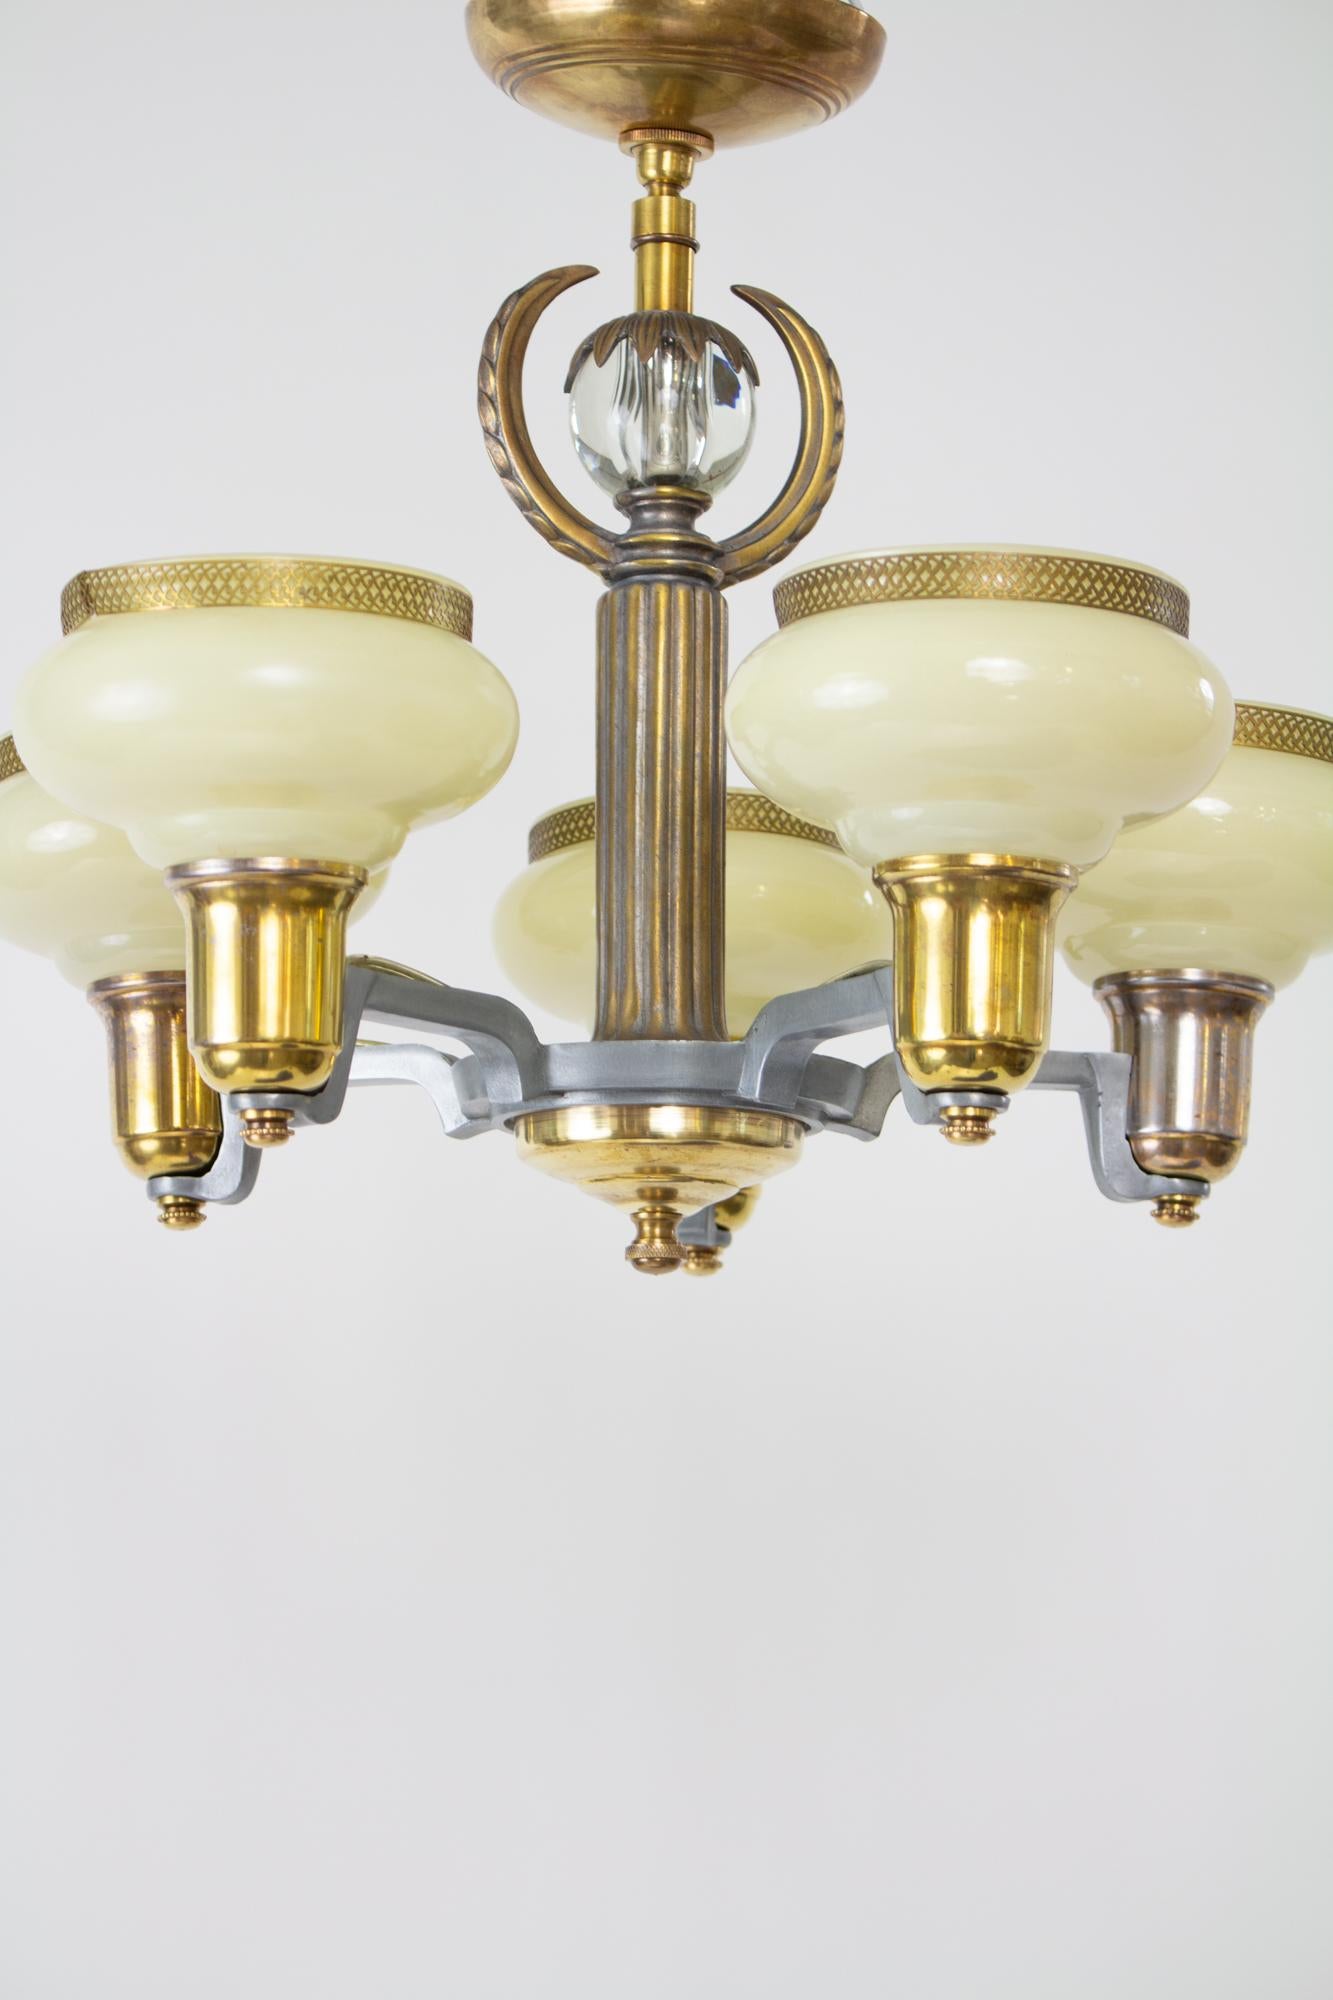 Five light art deco custard glass chandelier. Combination cast metal and brass. Center stem has a glass ball with a wreath. Direct mounts to ceiling box with a swivel, so it is an excellent choice for low ceilings